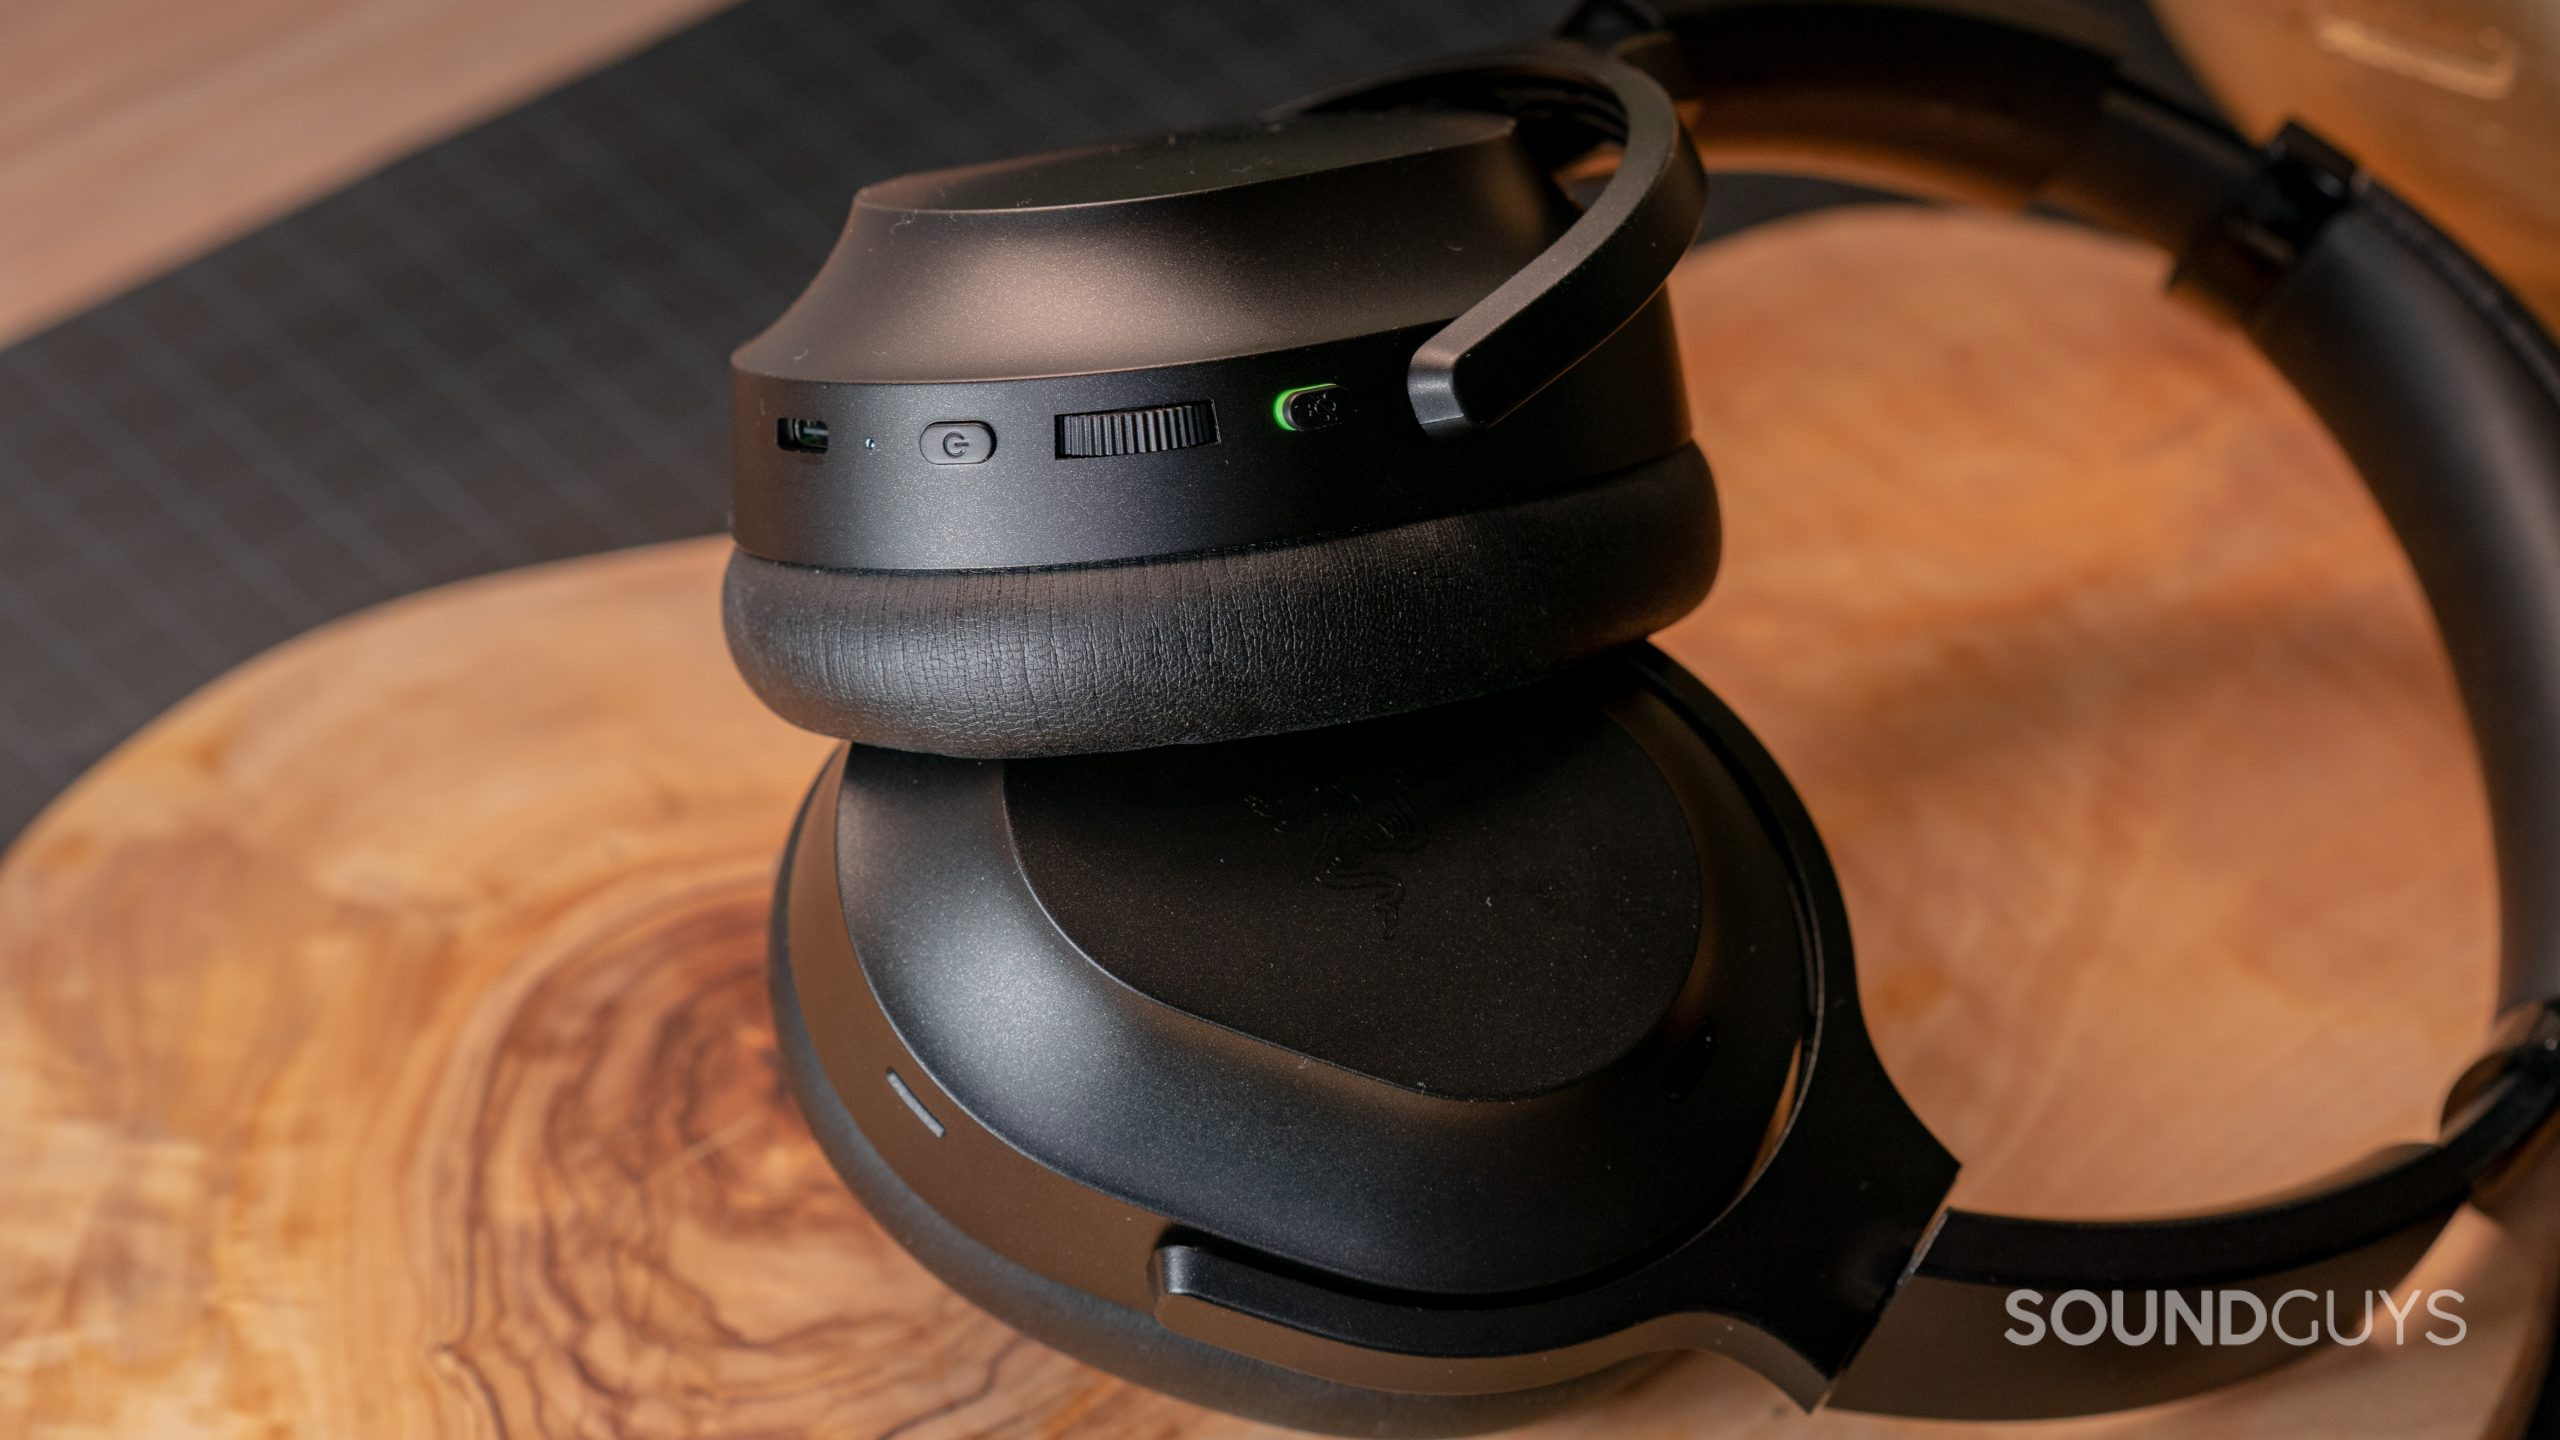 Razer's Barracuda Pro is its latest do-it-all gaming headset - The Verge